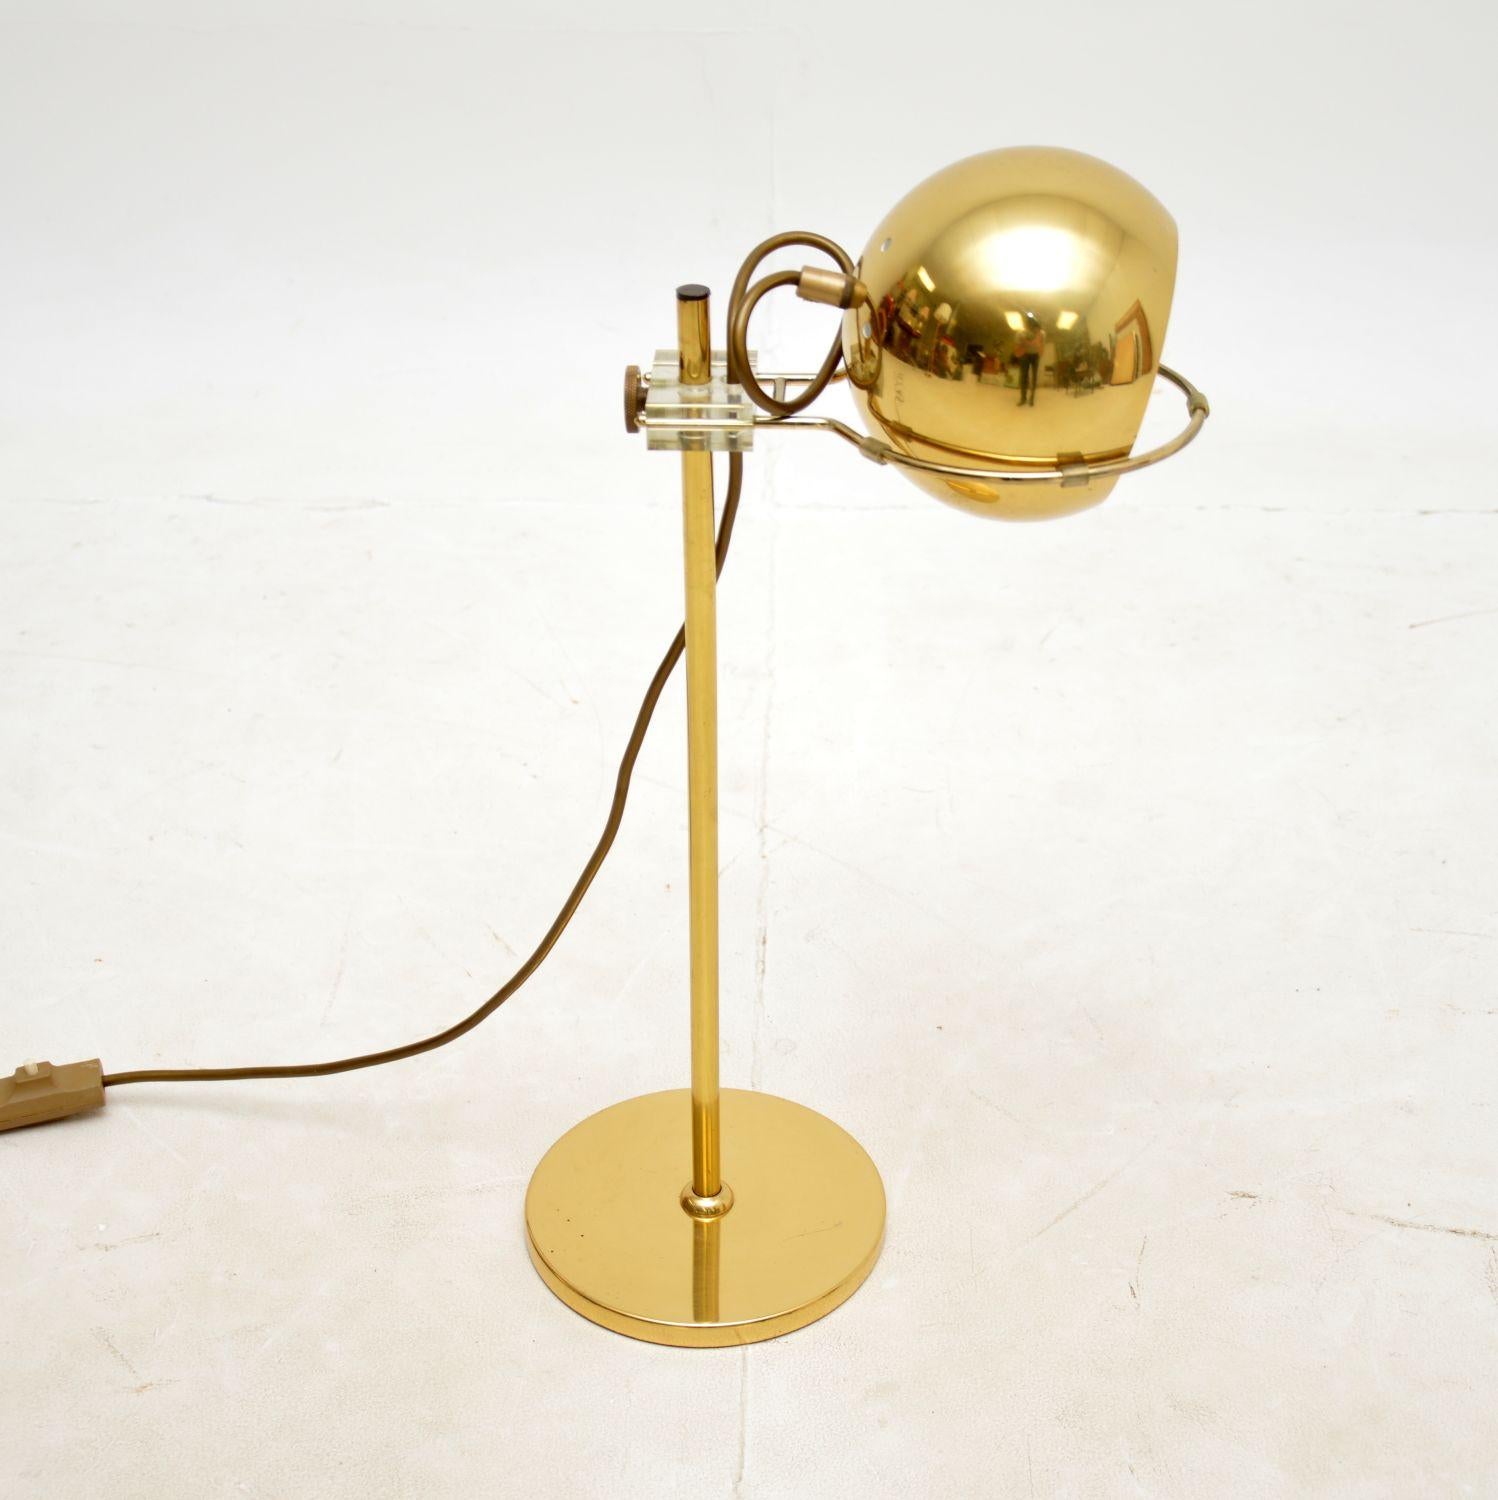 A very stylish and well made vintage desk lamp in brass. This was made in France, it dates from around the 1970s.
It has a fantastic design, the round lamp shade rests loosely in an adjustable basket that can be raised and lowered along the central